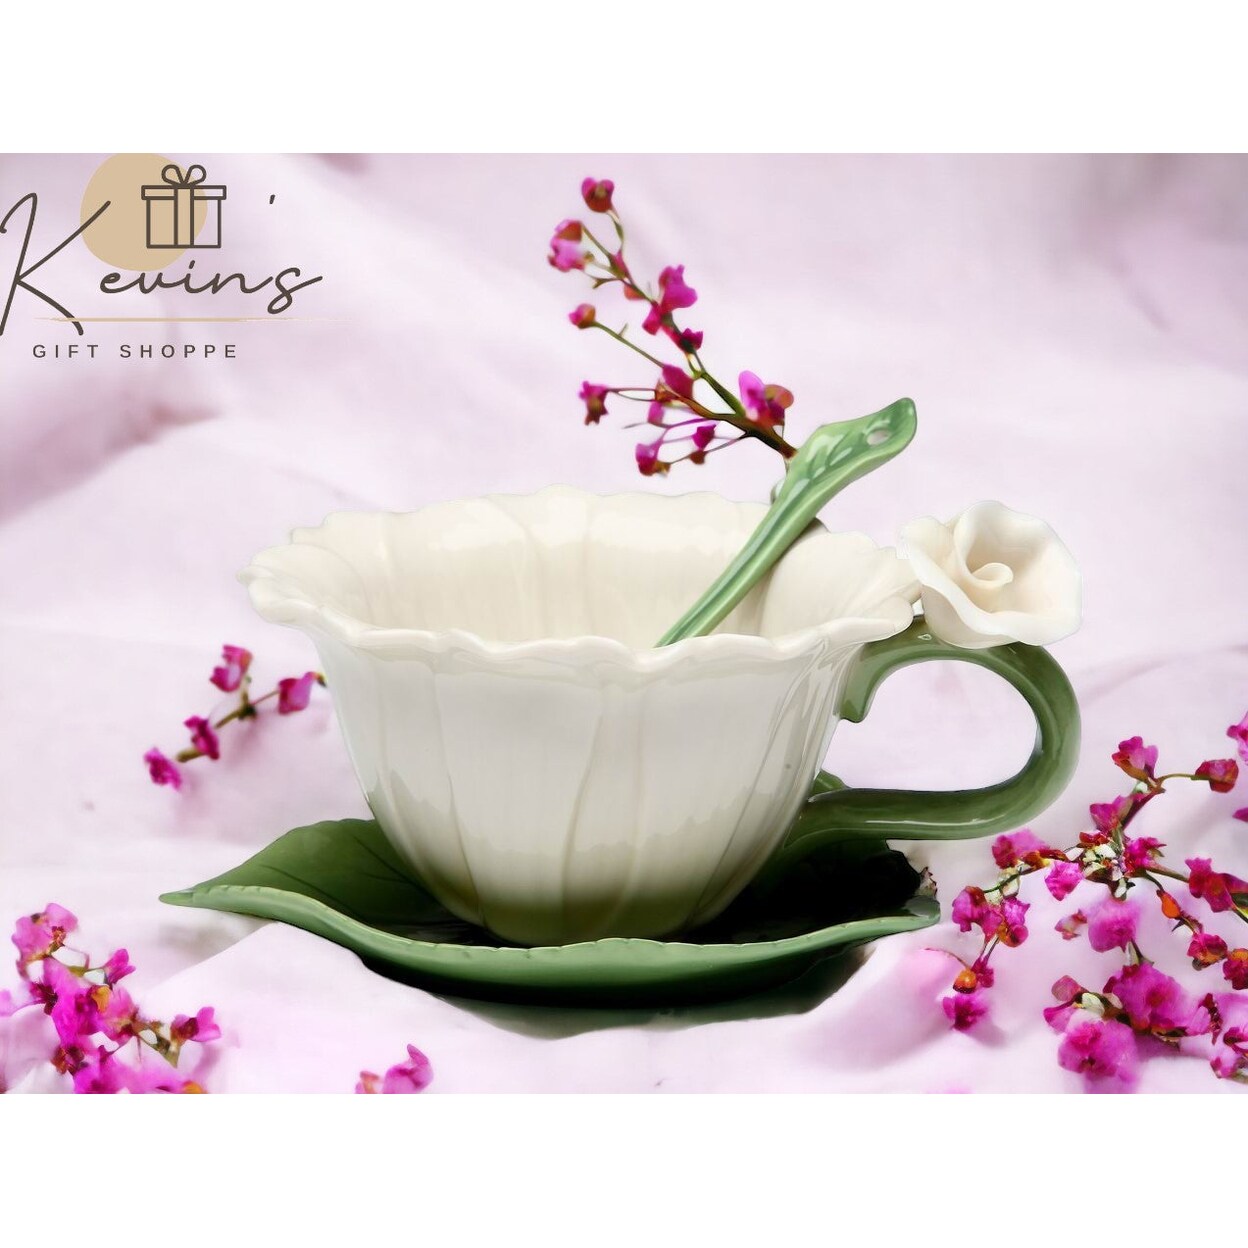 kevinsgiftshoppe Ceramic White Daisy Flower Cup and Saucer and Spoon-1 Set  Mom  Tea Party Decor Cafe Decor